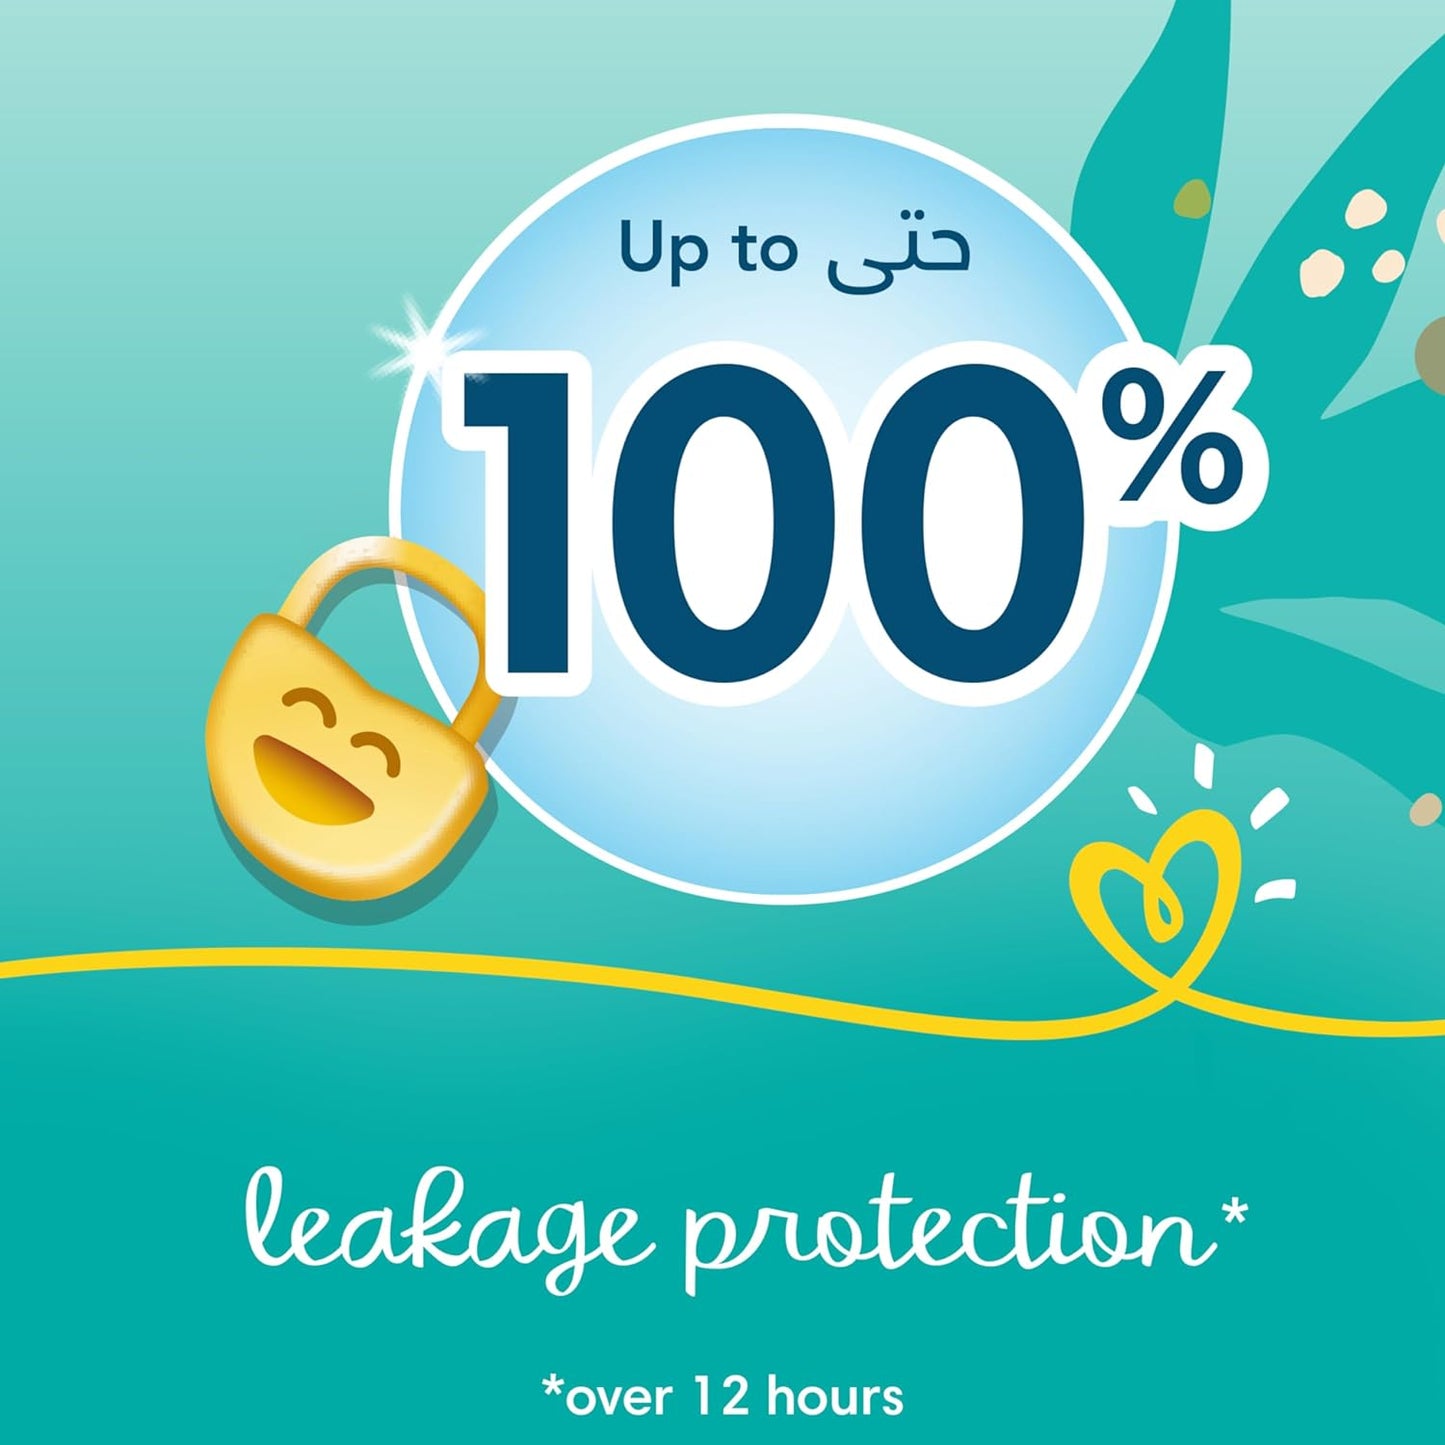 Pampers Baby-Dry Taped Diapers with Aloe Vera Lotion, up to 100% Leakage Protection, Size 5, 11-16kg, 70 Count - Laadlee